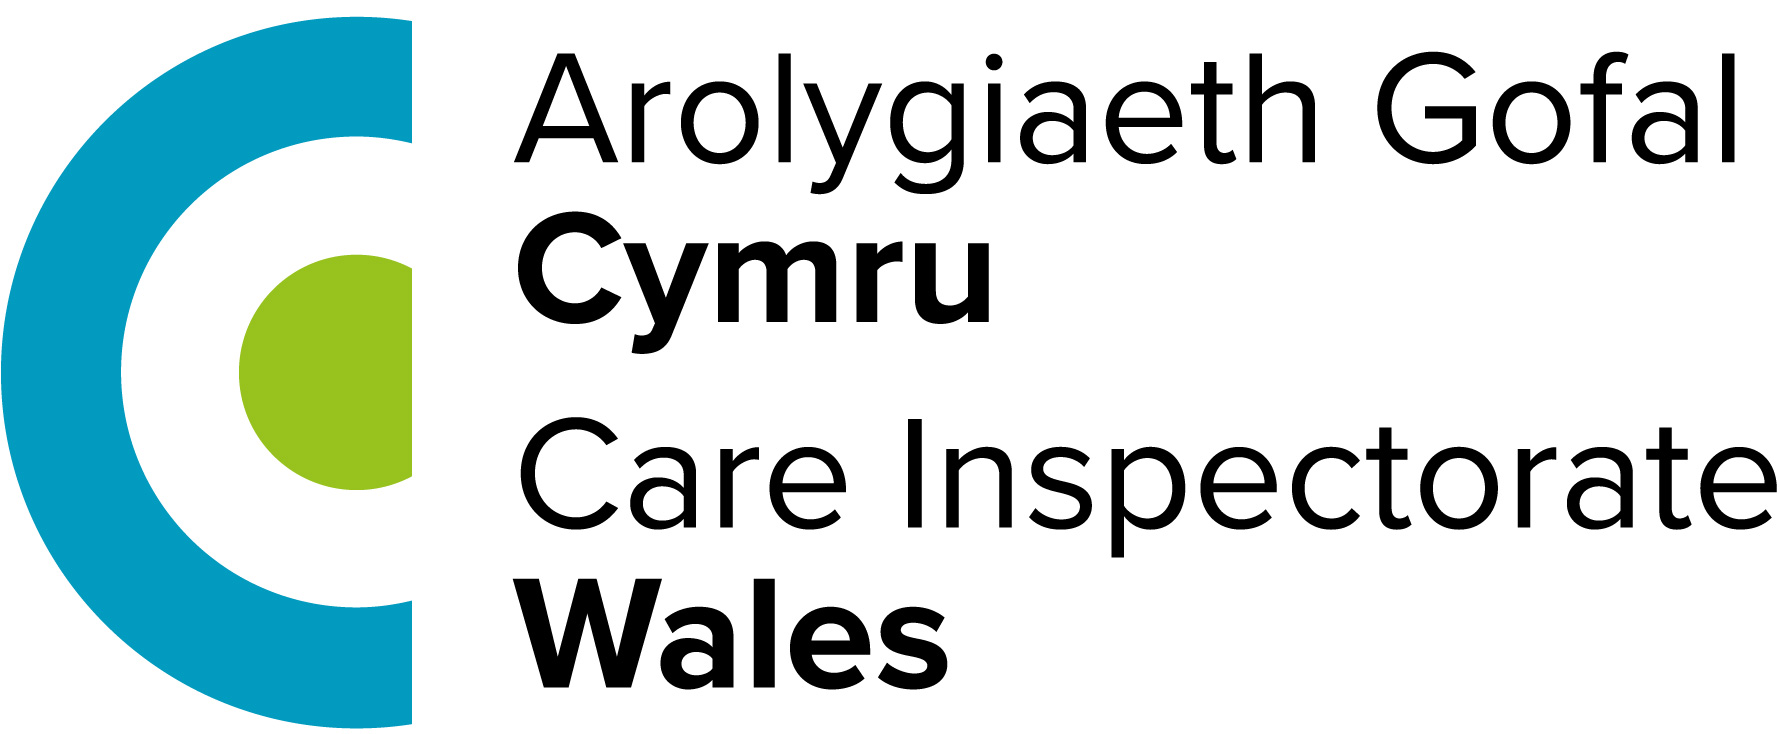 care_inspectorate_wales_logo